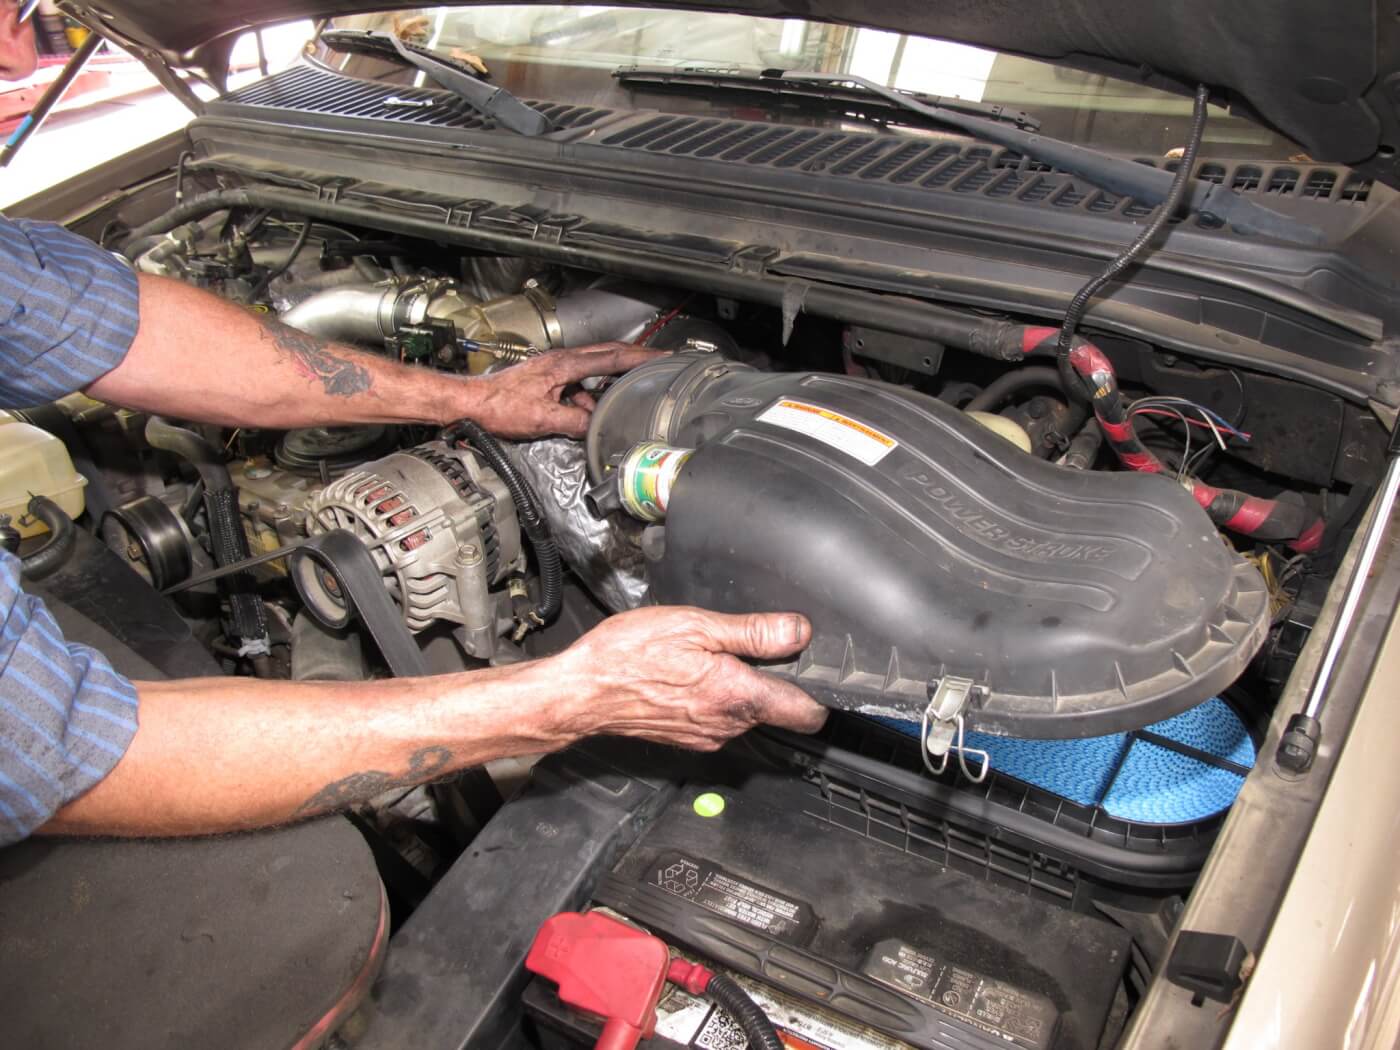 19. Installing a few air filter, if needed, is always a good idea when doing any service under the hood. 